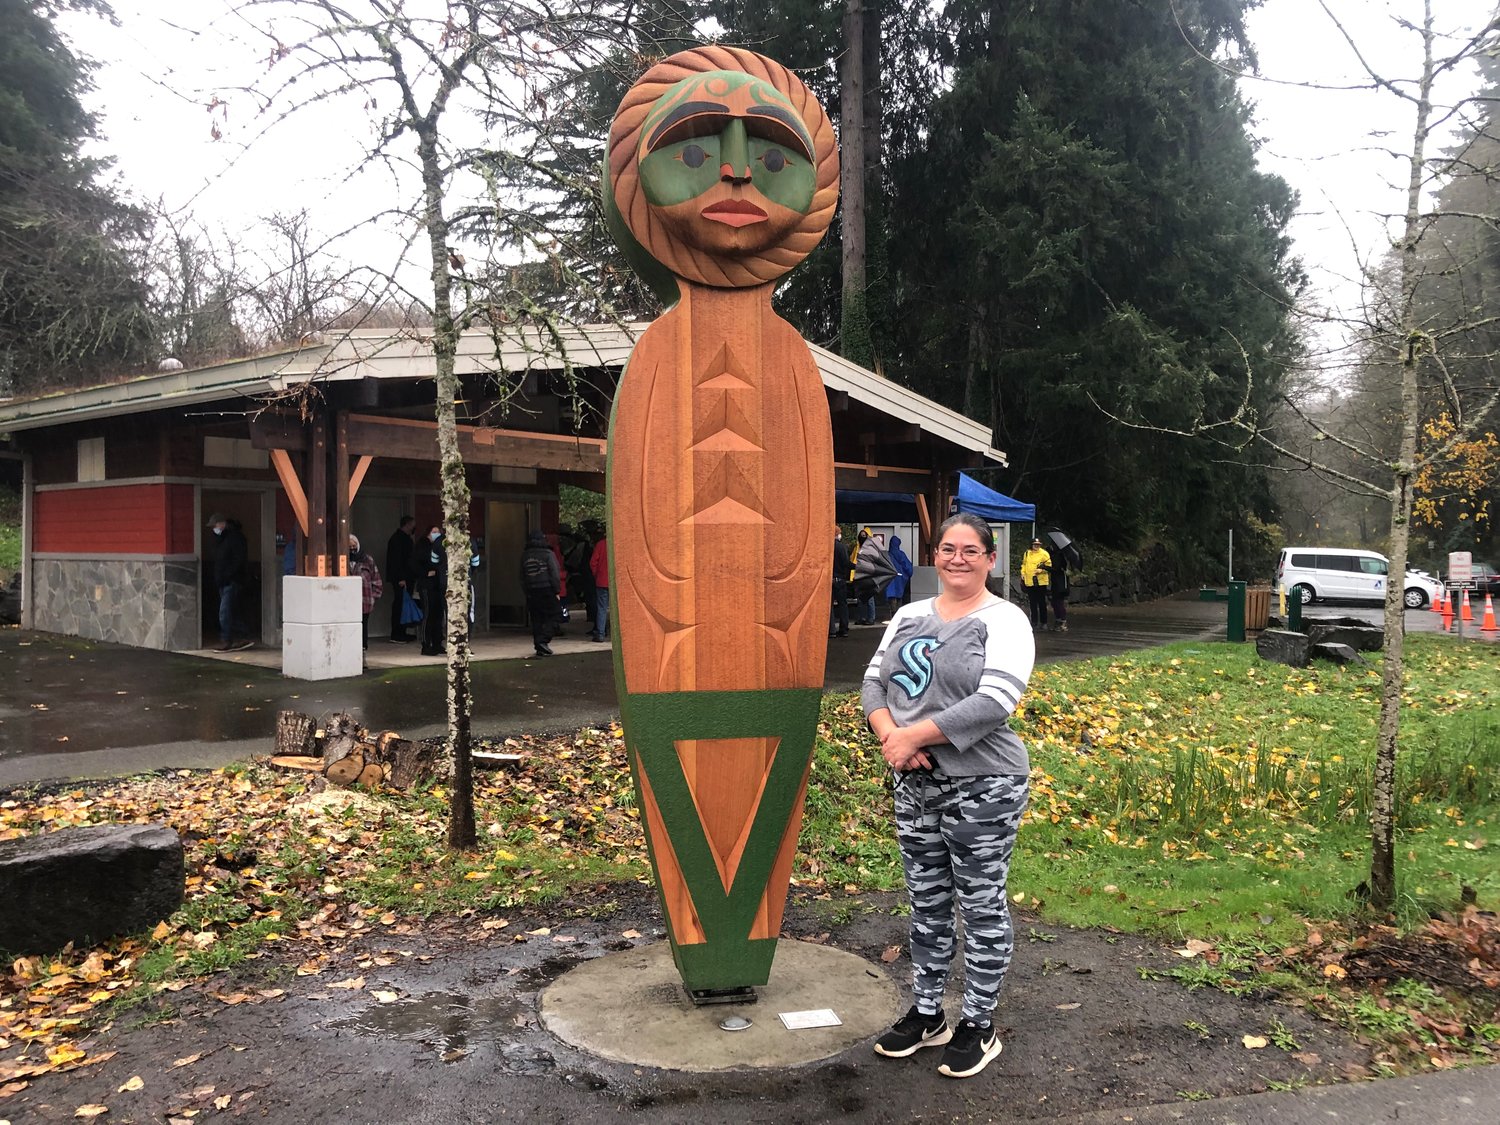 Andrea Wilbur-Sigo, the Squaxin Island Tribe carver, stands next to "People of the Water," half of the Unity project installed on Eastside Street in Olympia, on Dec. 11, 2021.